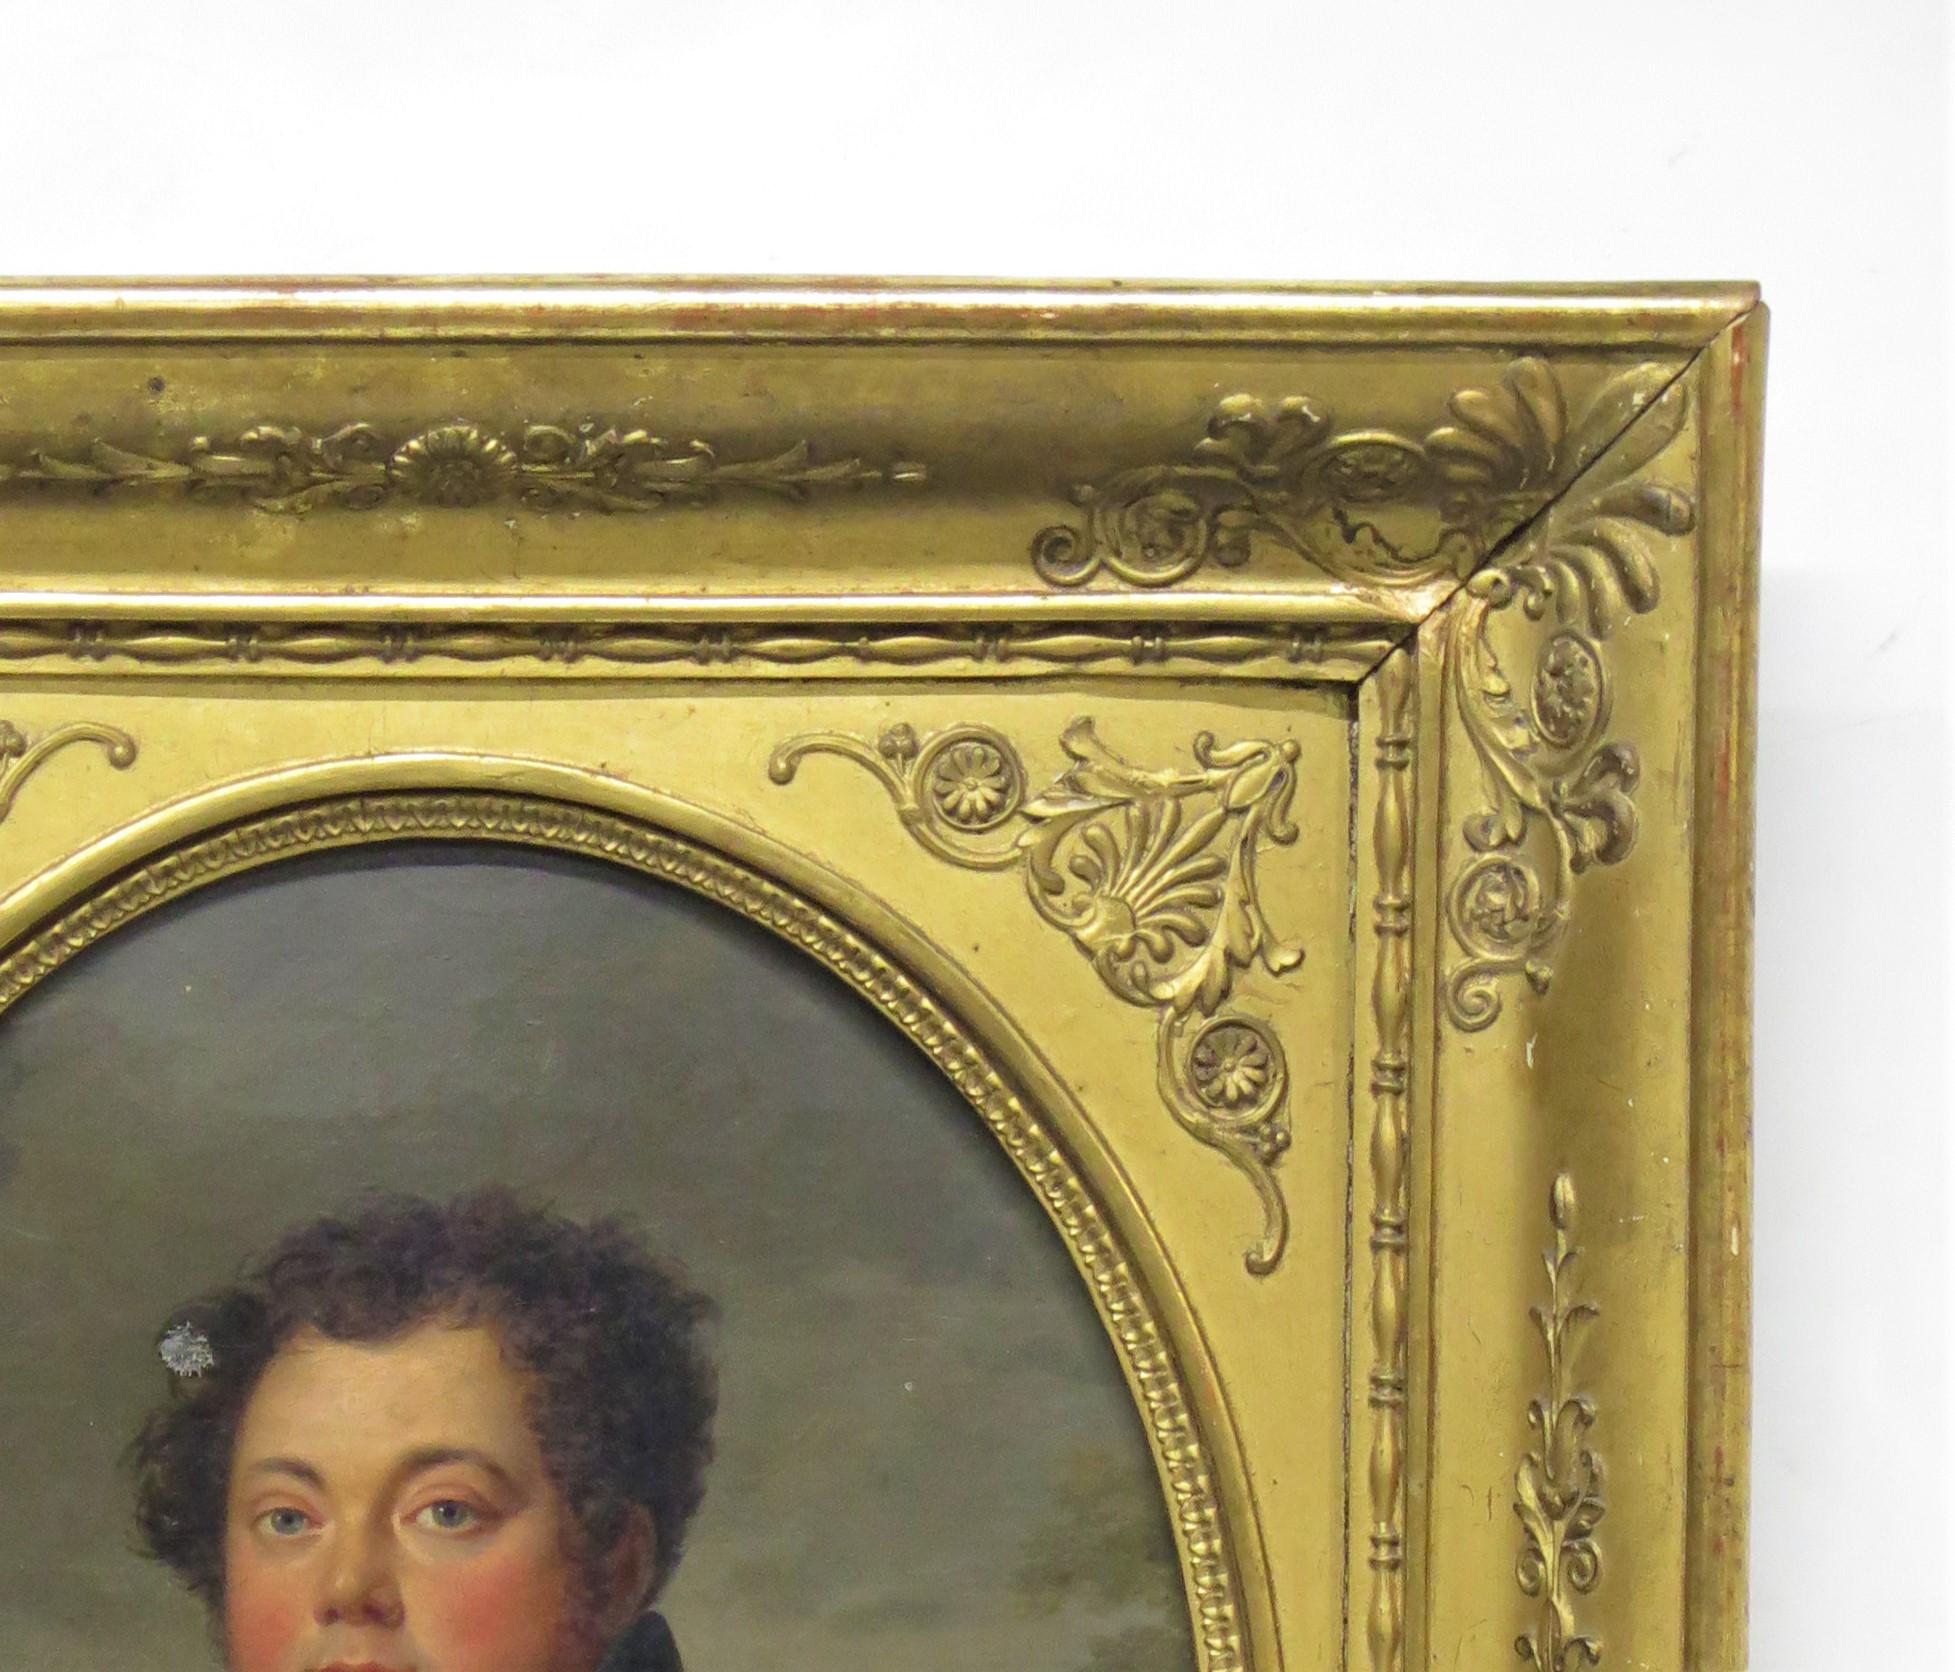 portrait of a robust gentleman, a fine example of an antique ovular oil on canvas, the work depicts a hale and hearty gentleman with rosey cheeks and curley hair dressed in black, extensive writing verso, France, 19th century

Image measures: 8.25 W